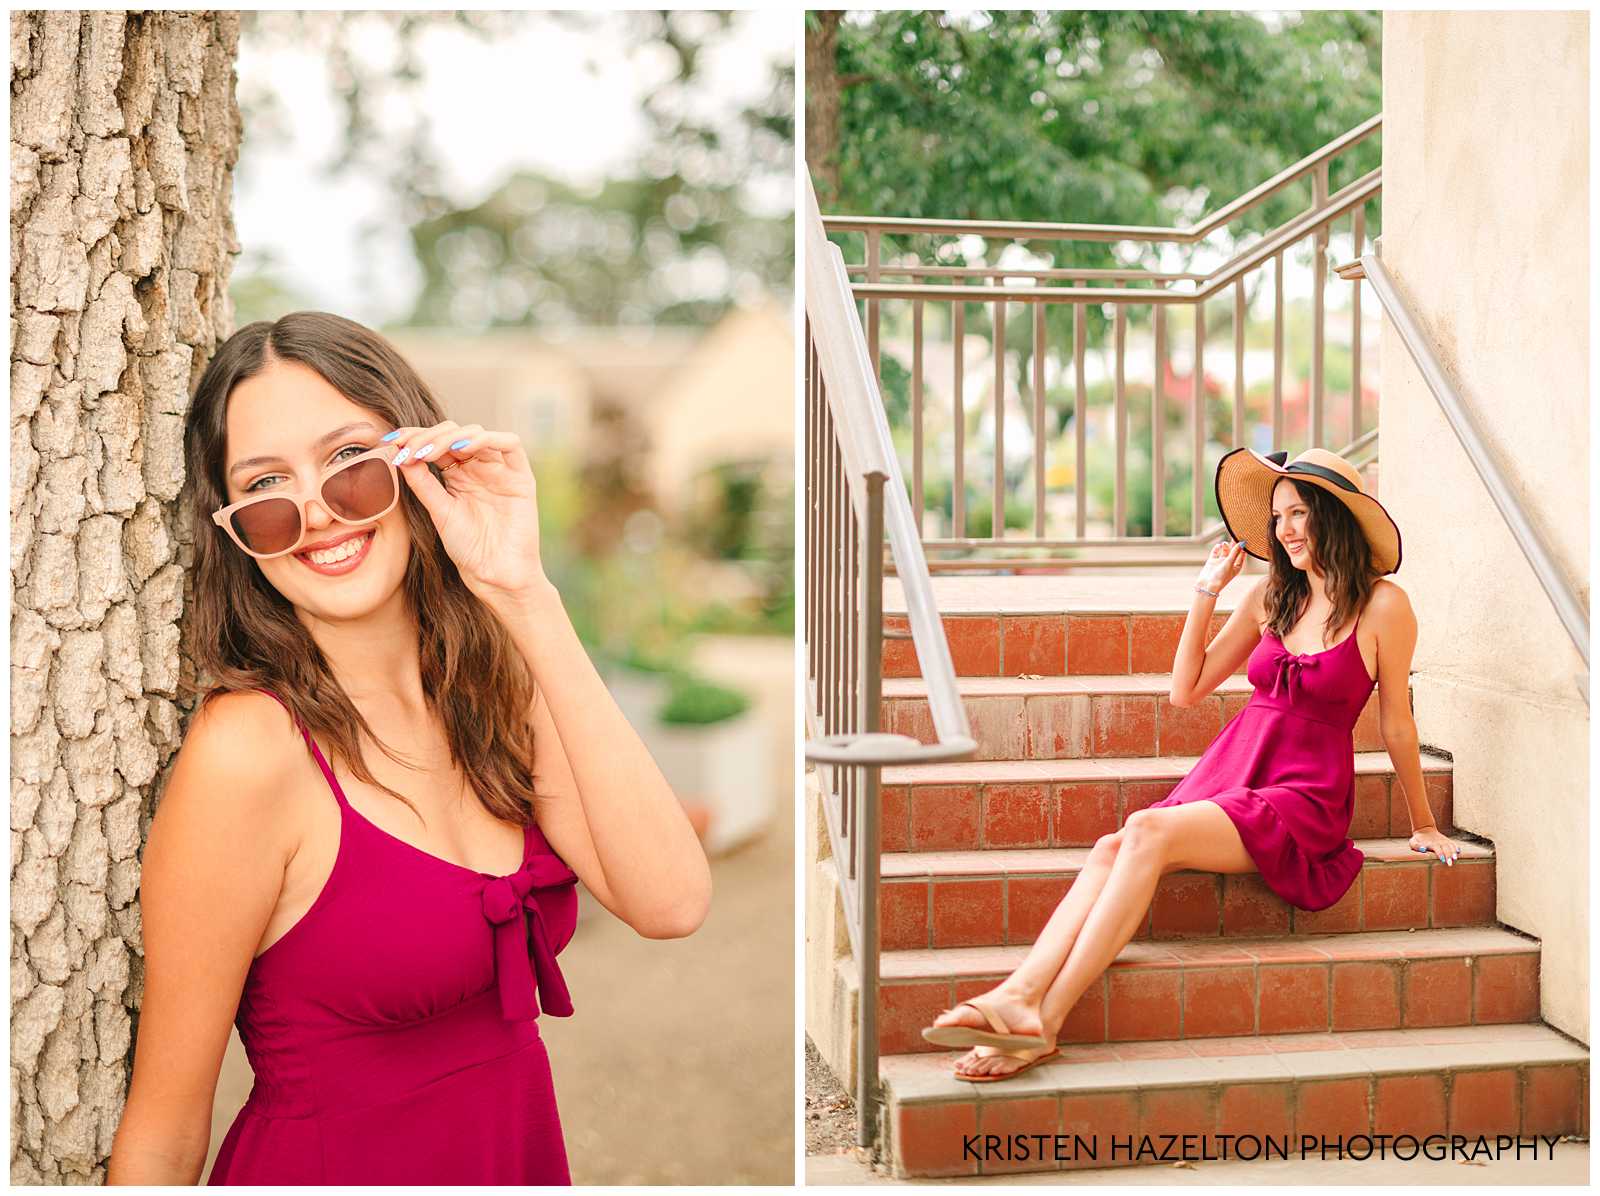 High school senior girl wearing a pink dress and sun hat while seated on terra cotta tile steps.